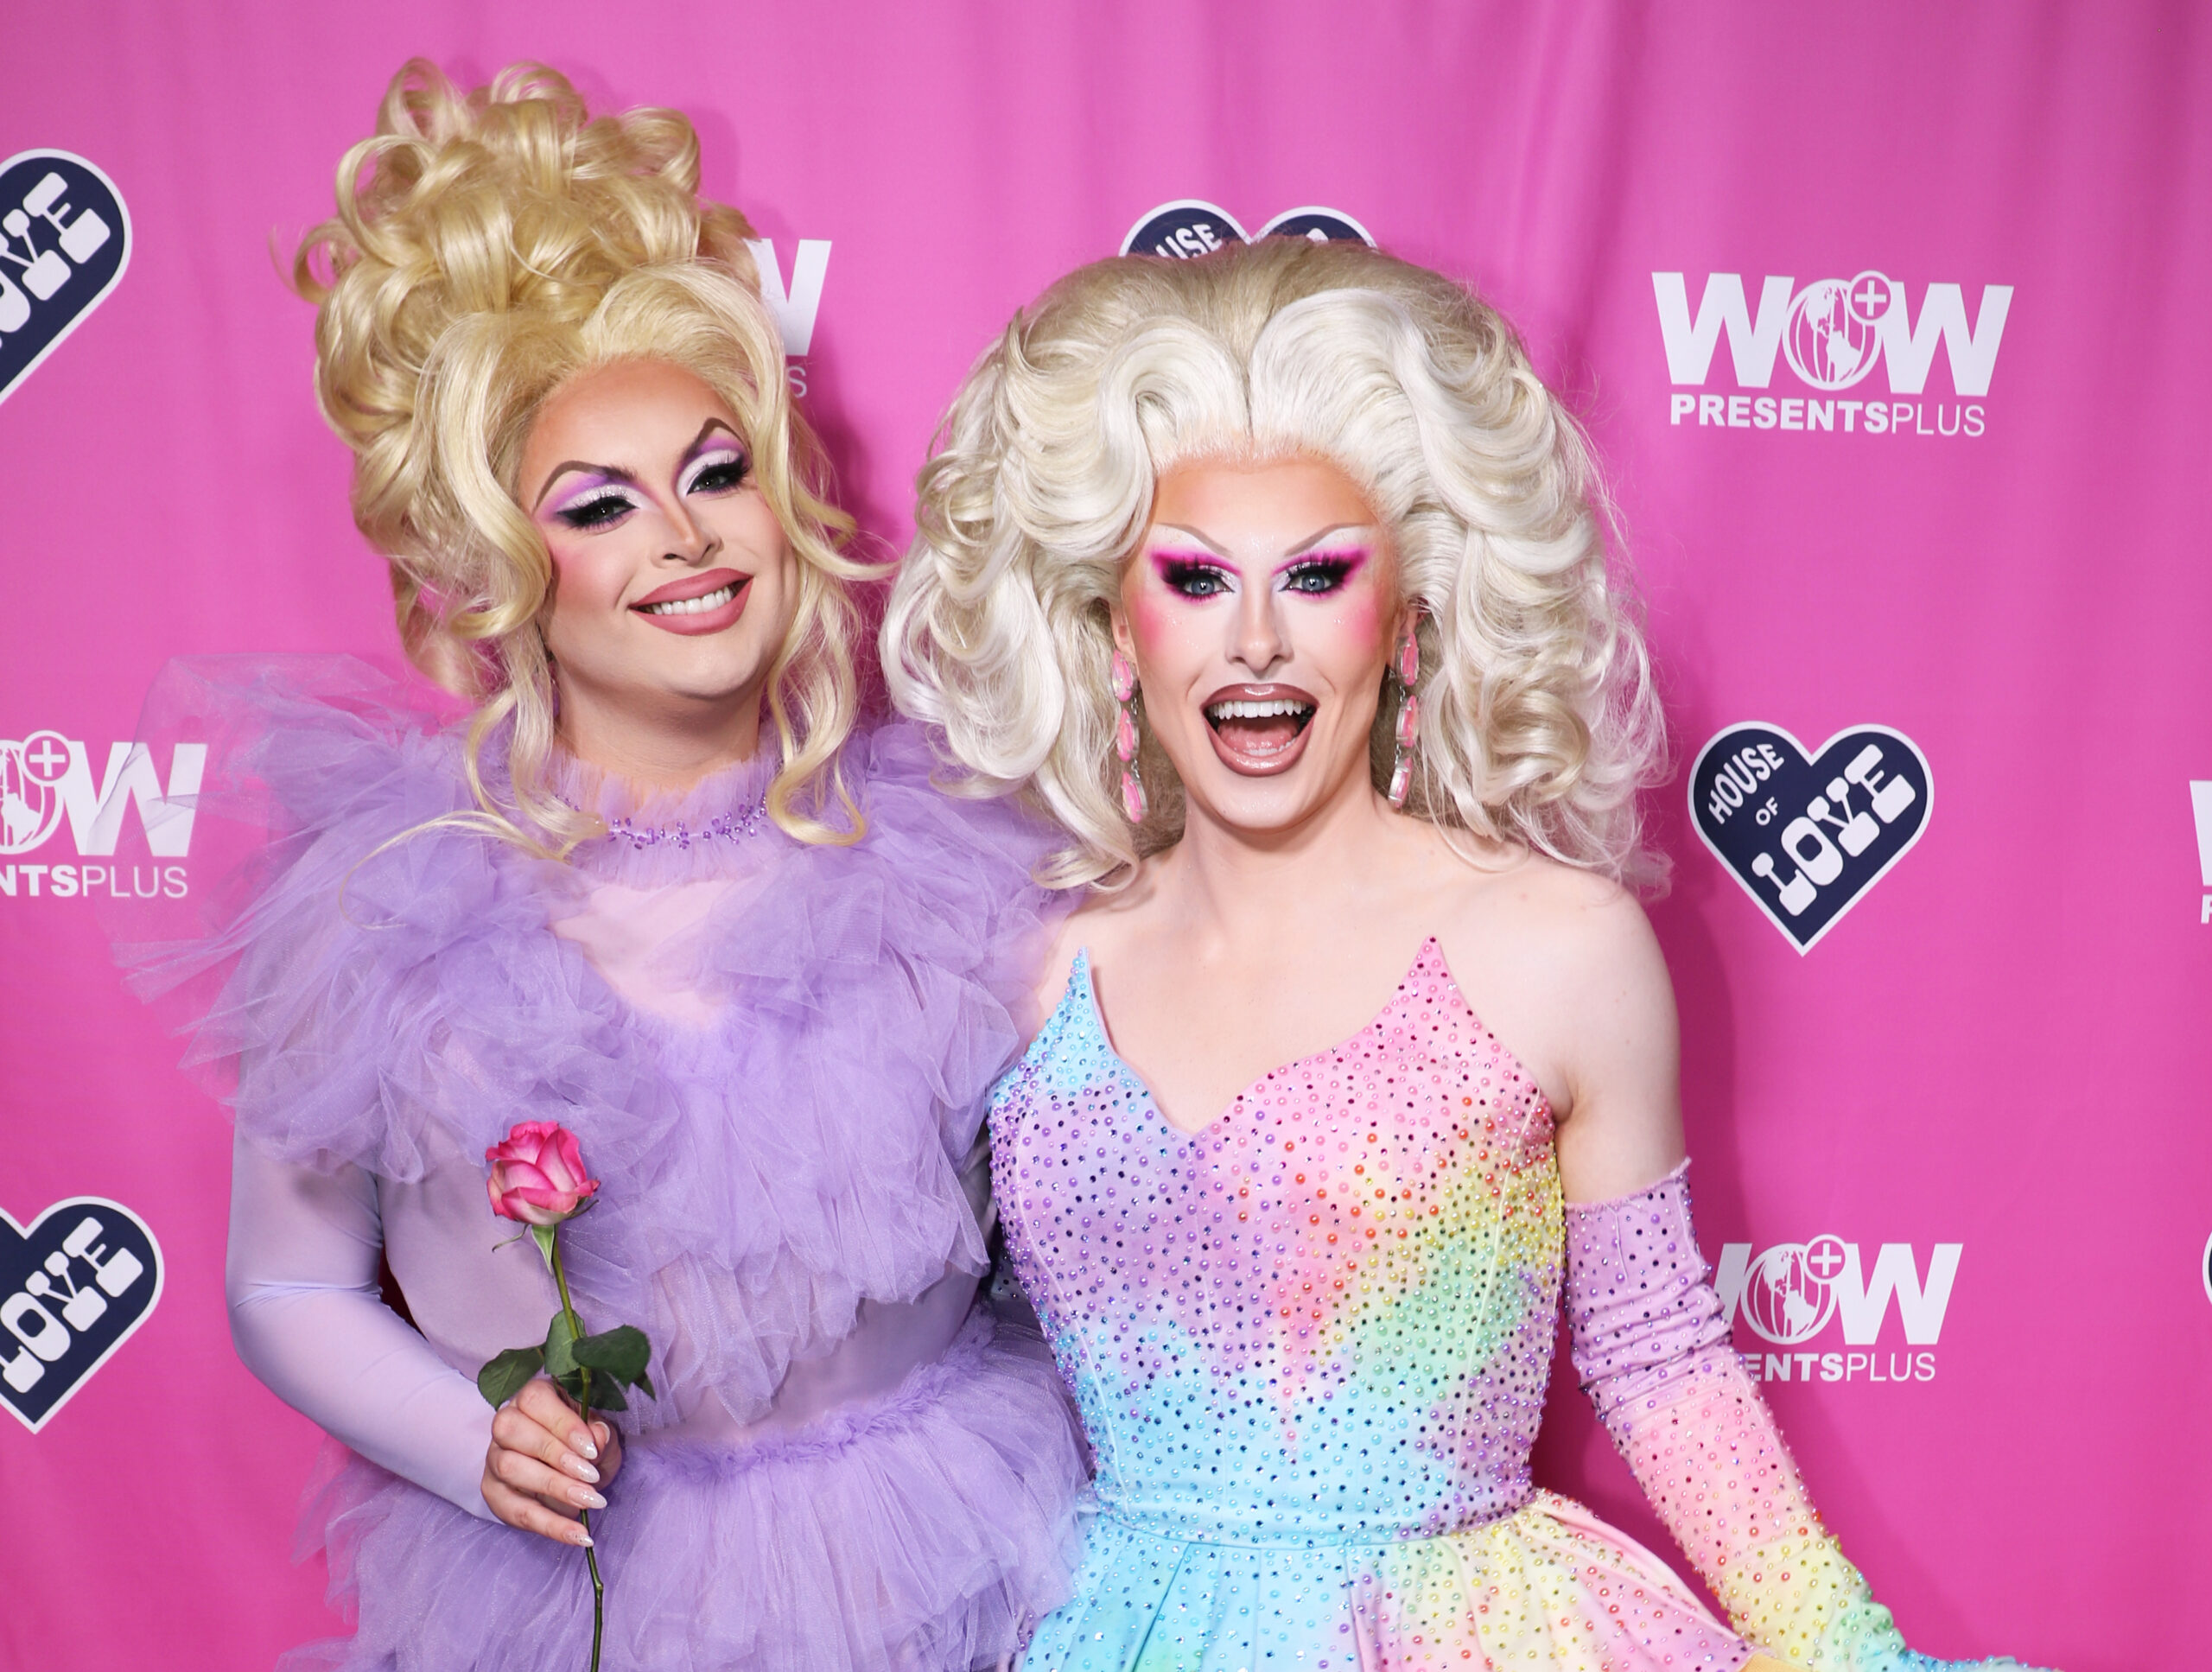 World of Wonder hosted the US premiere screening event of “RuPaul’s Drag Race UK”